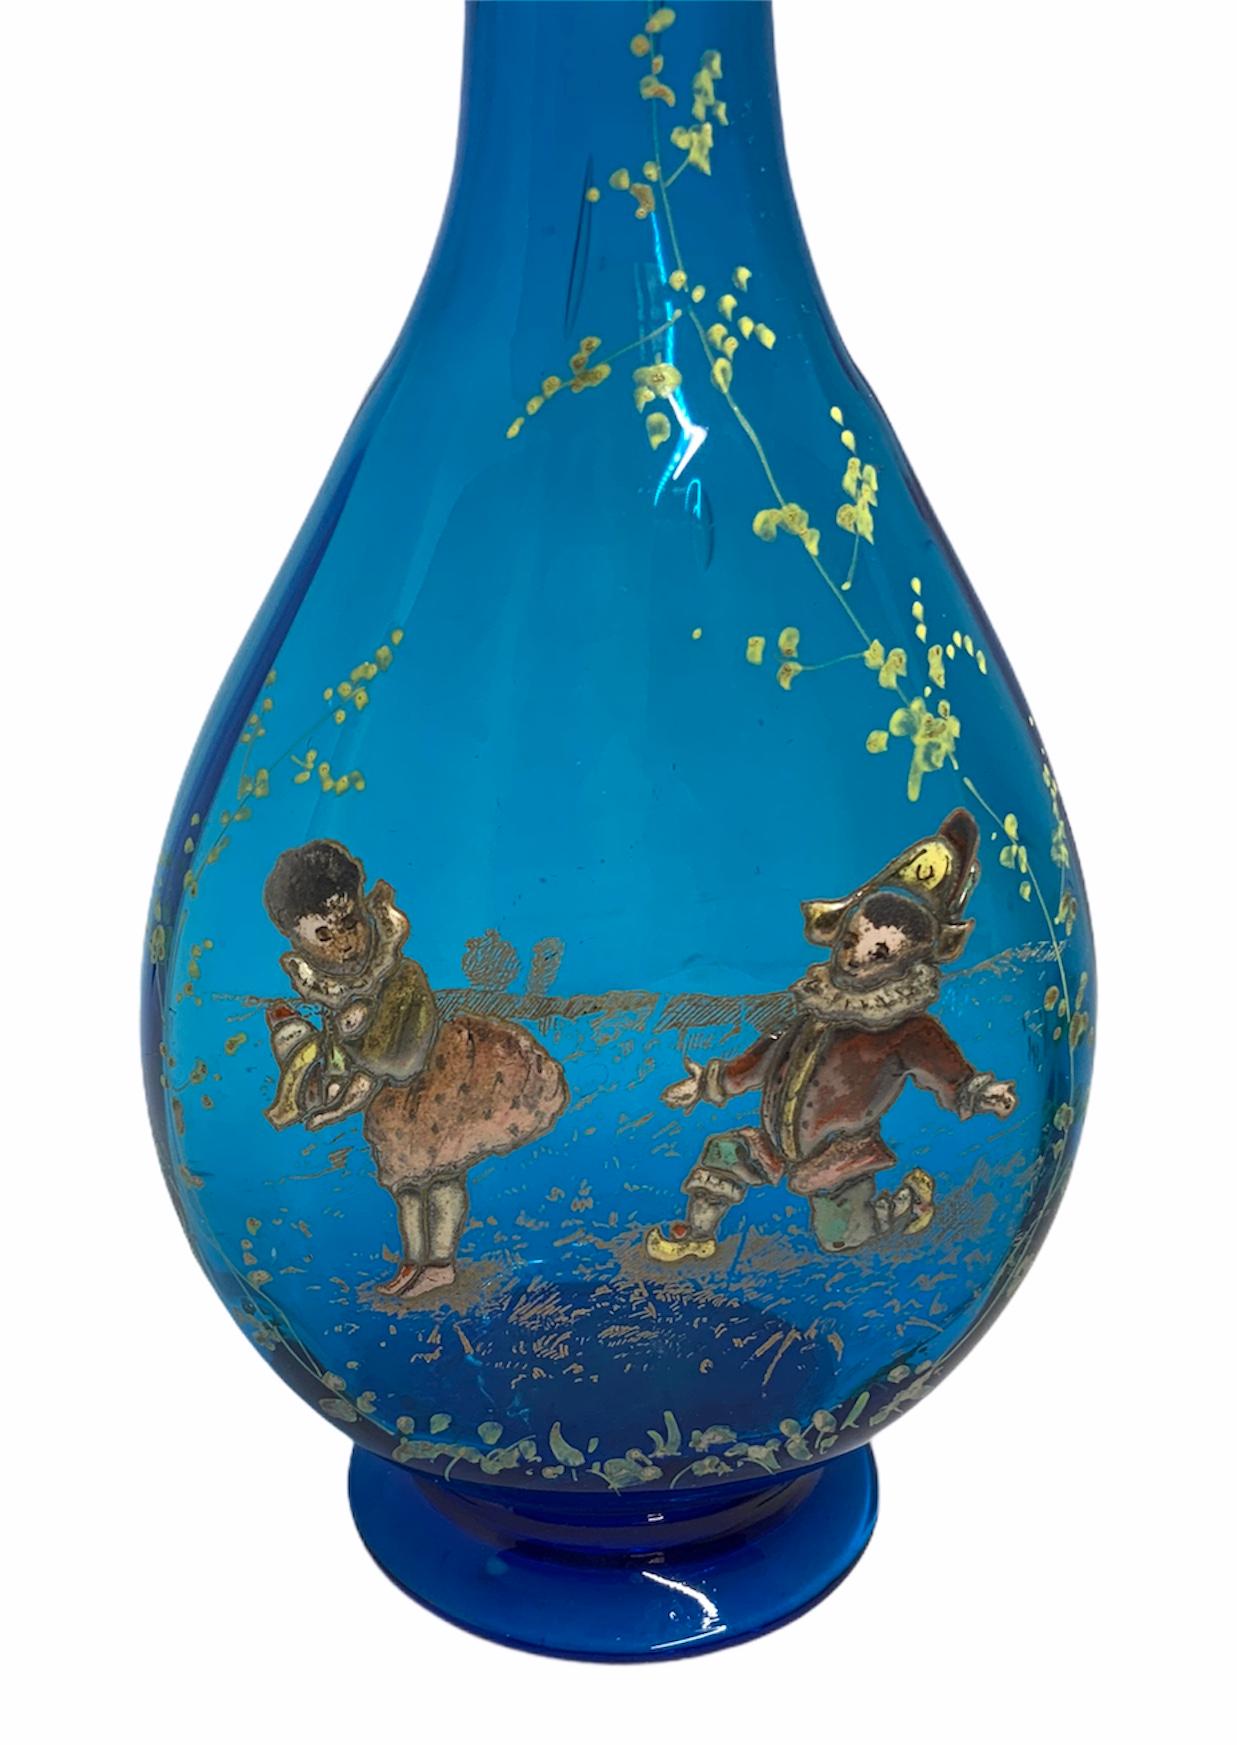 This is a royal blue glass decanter depicting a gold- silver enamel painting of a girl & an harlequin. Behind them, there is also some gilt stenciled decor of what appears to be a lake or pond. The rim of the bottle is shaped as a ruffle and the